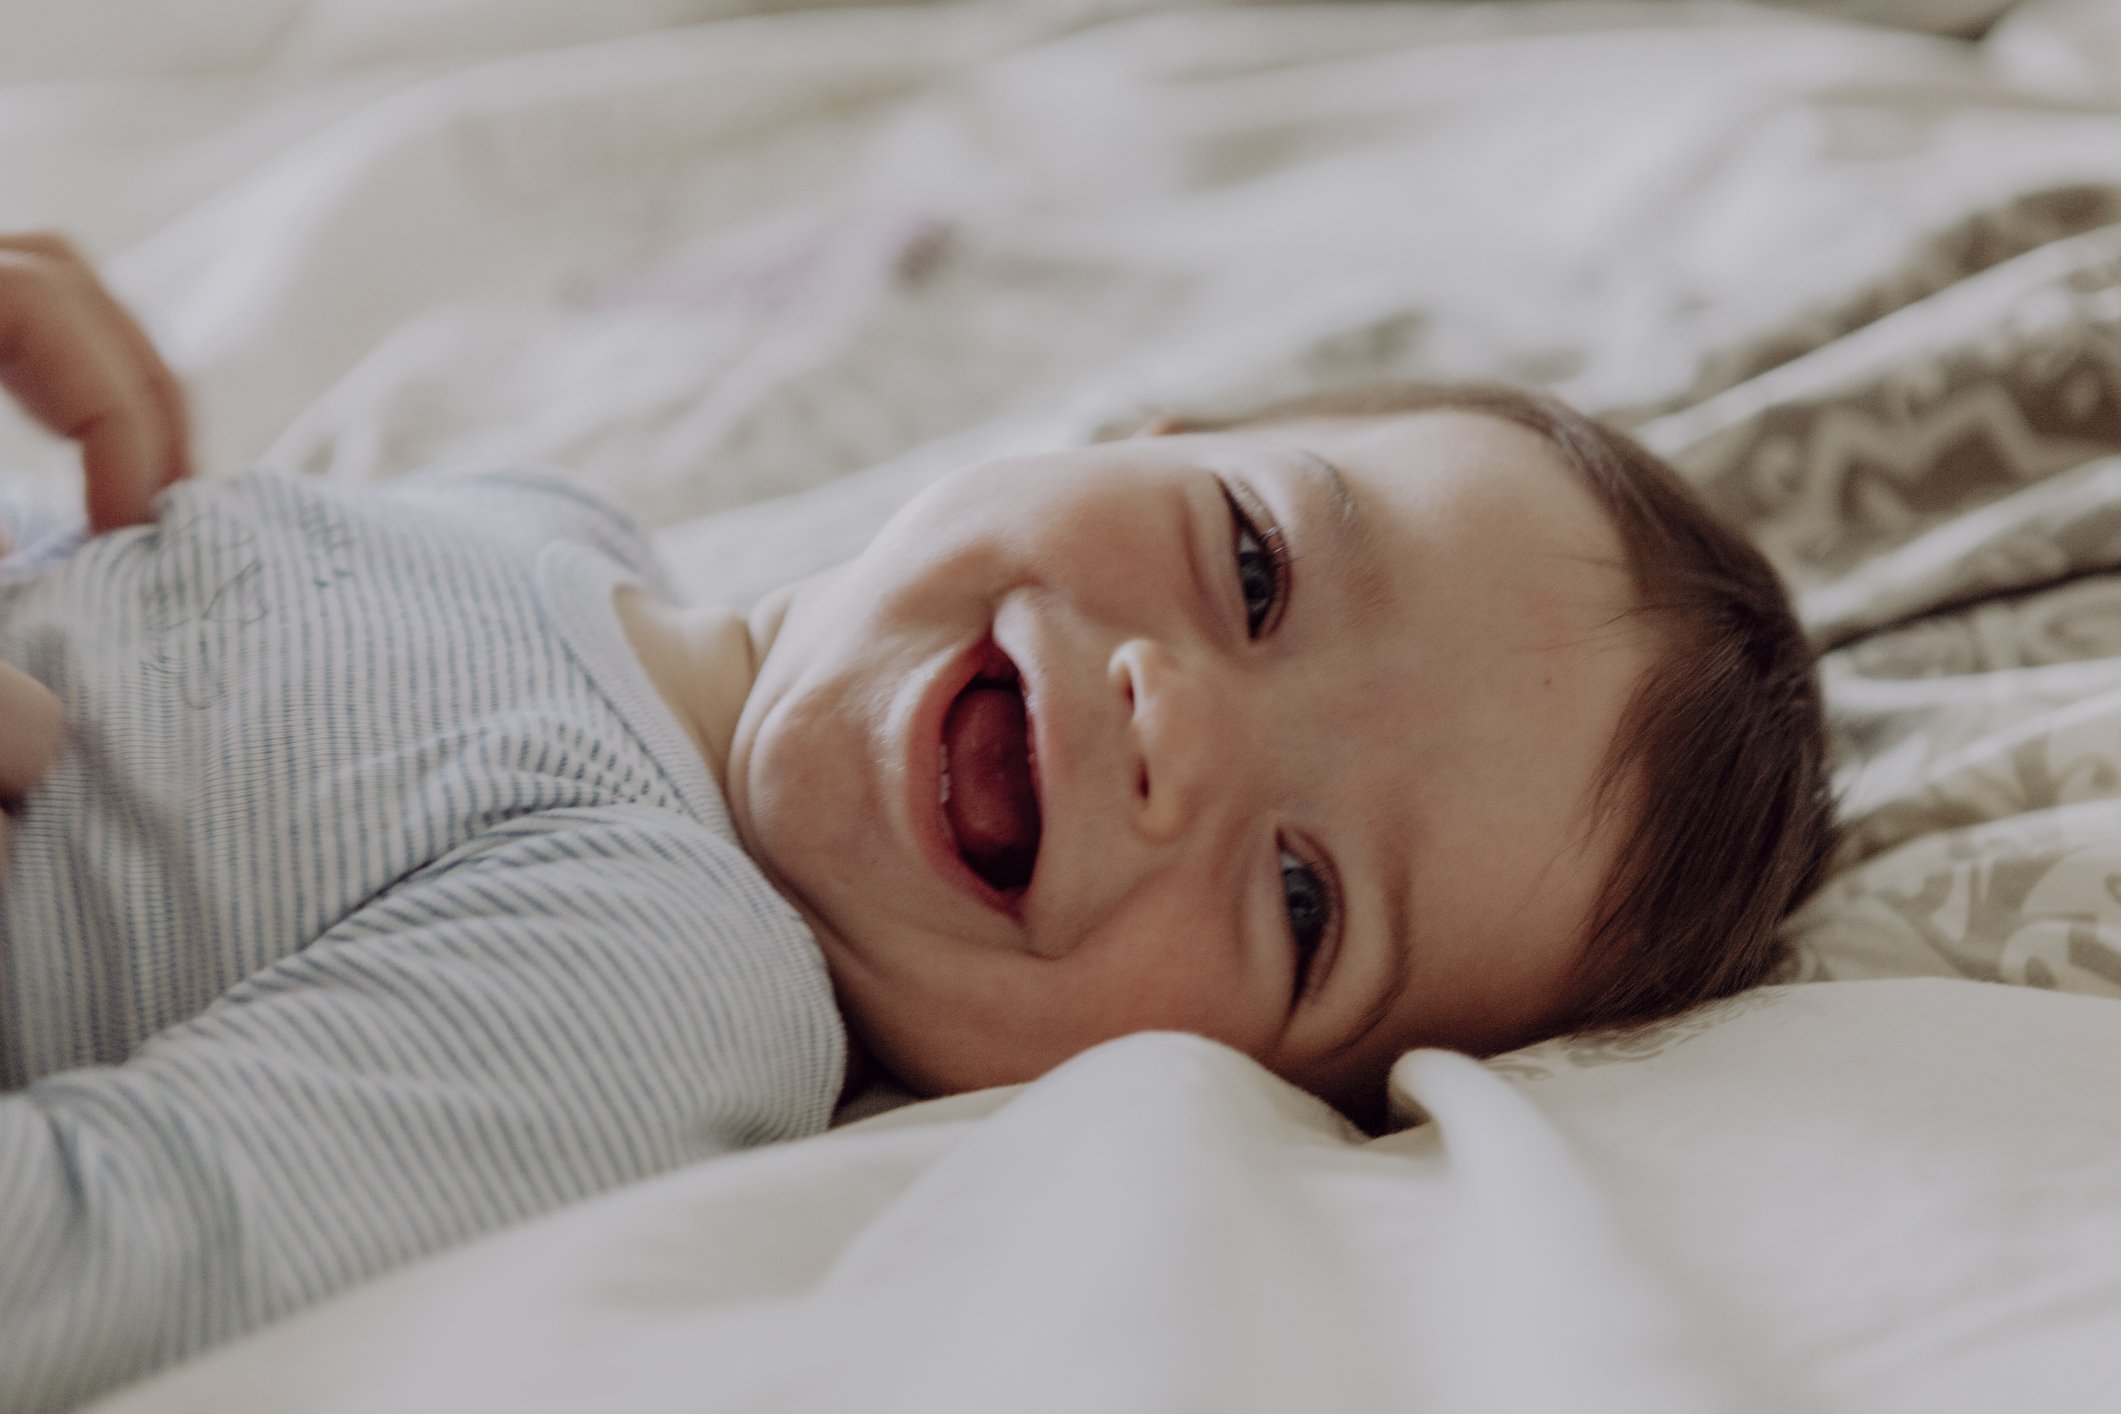 A portrait picture of a baby happily laughing lying on the bed. | Photo: Getty Images 